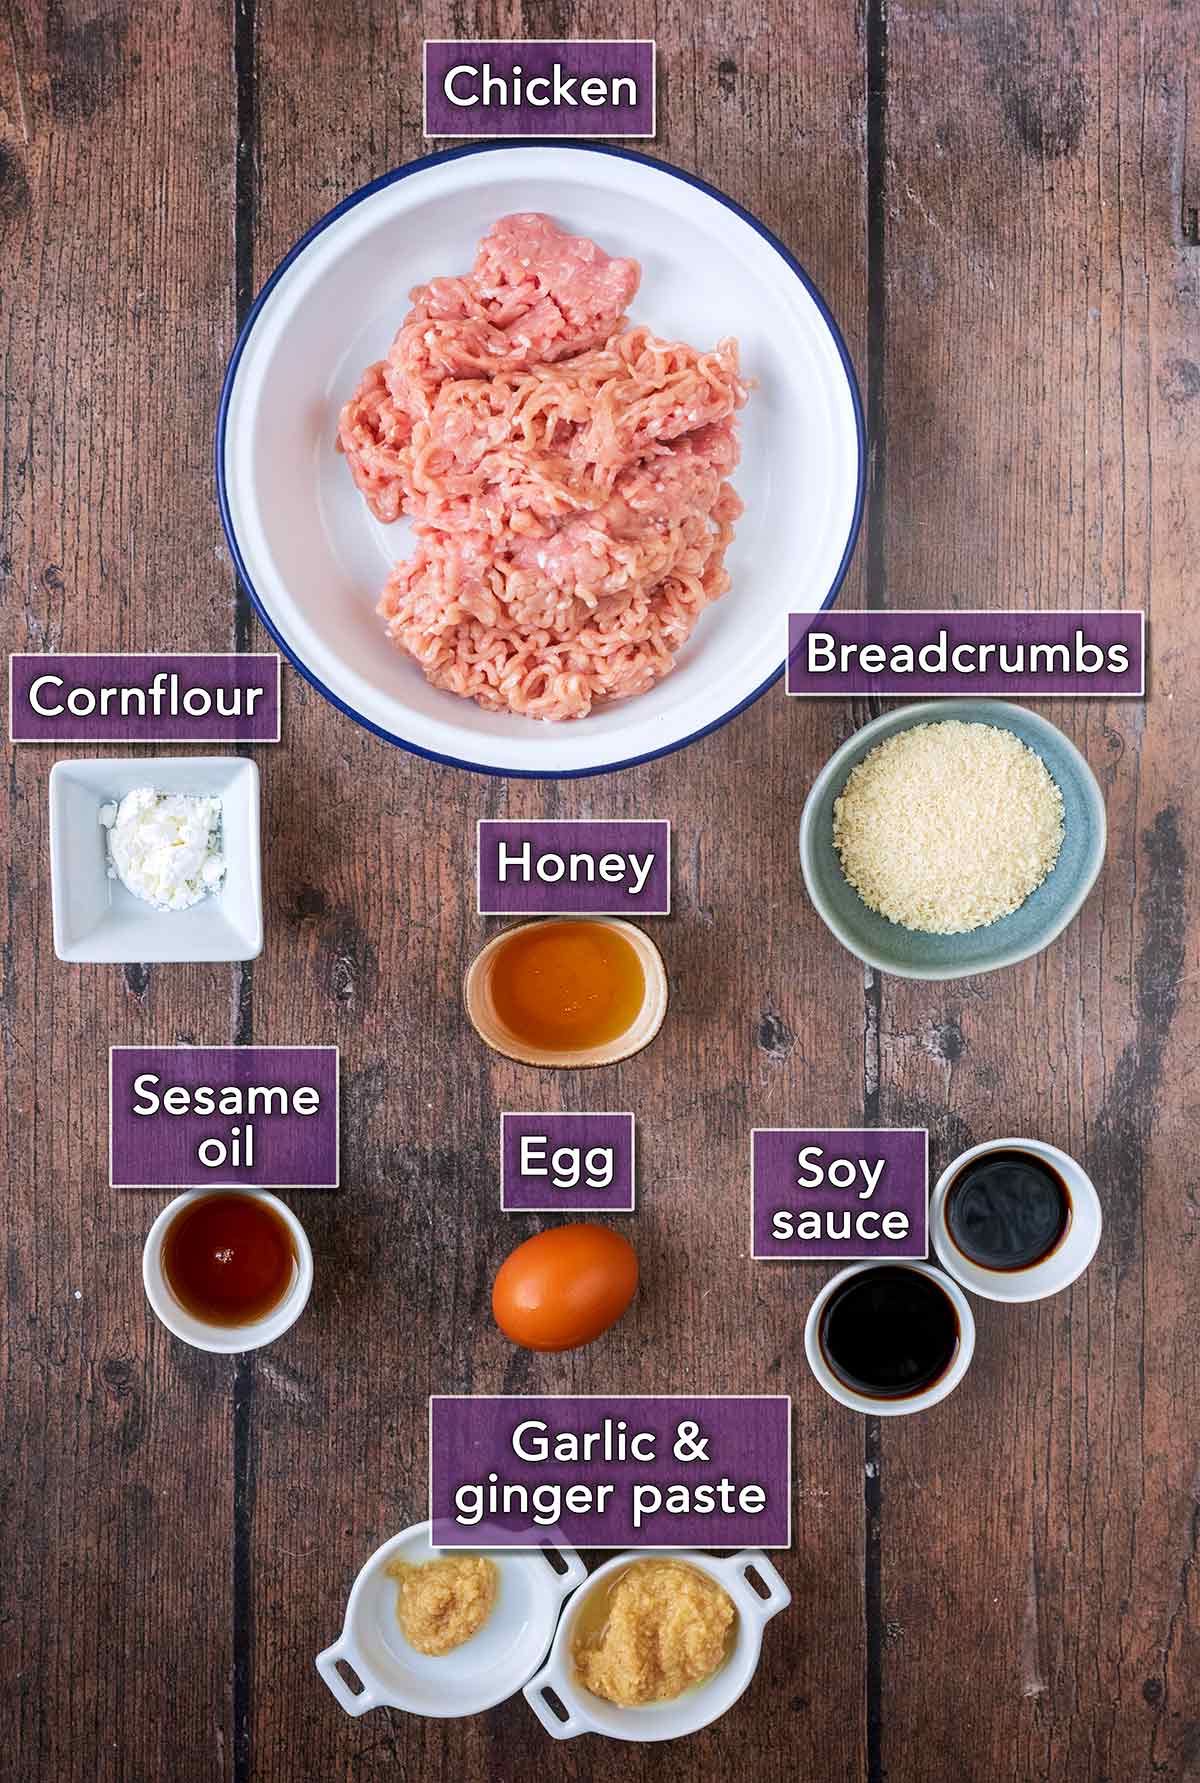 All the ingredients needed for this recipe each with a text overlay label.